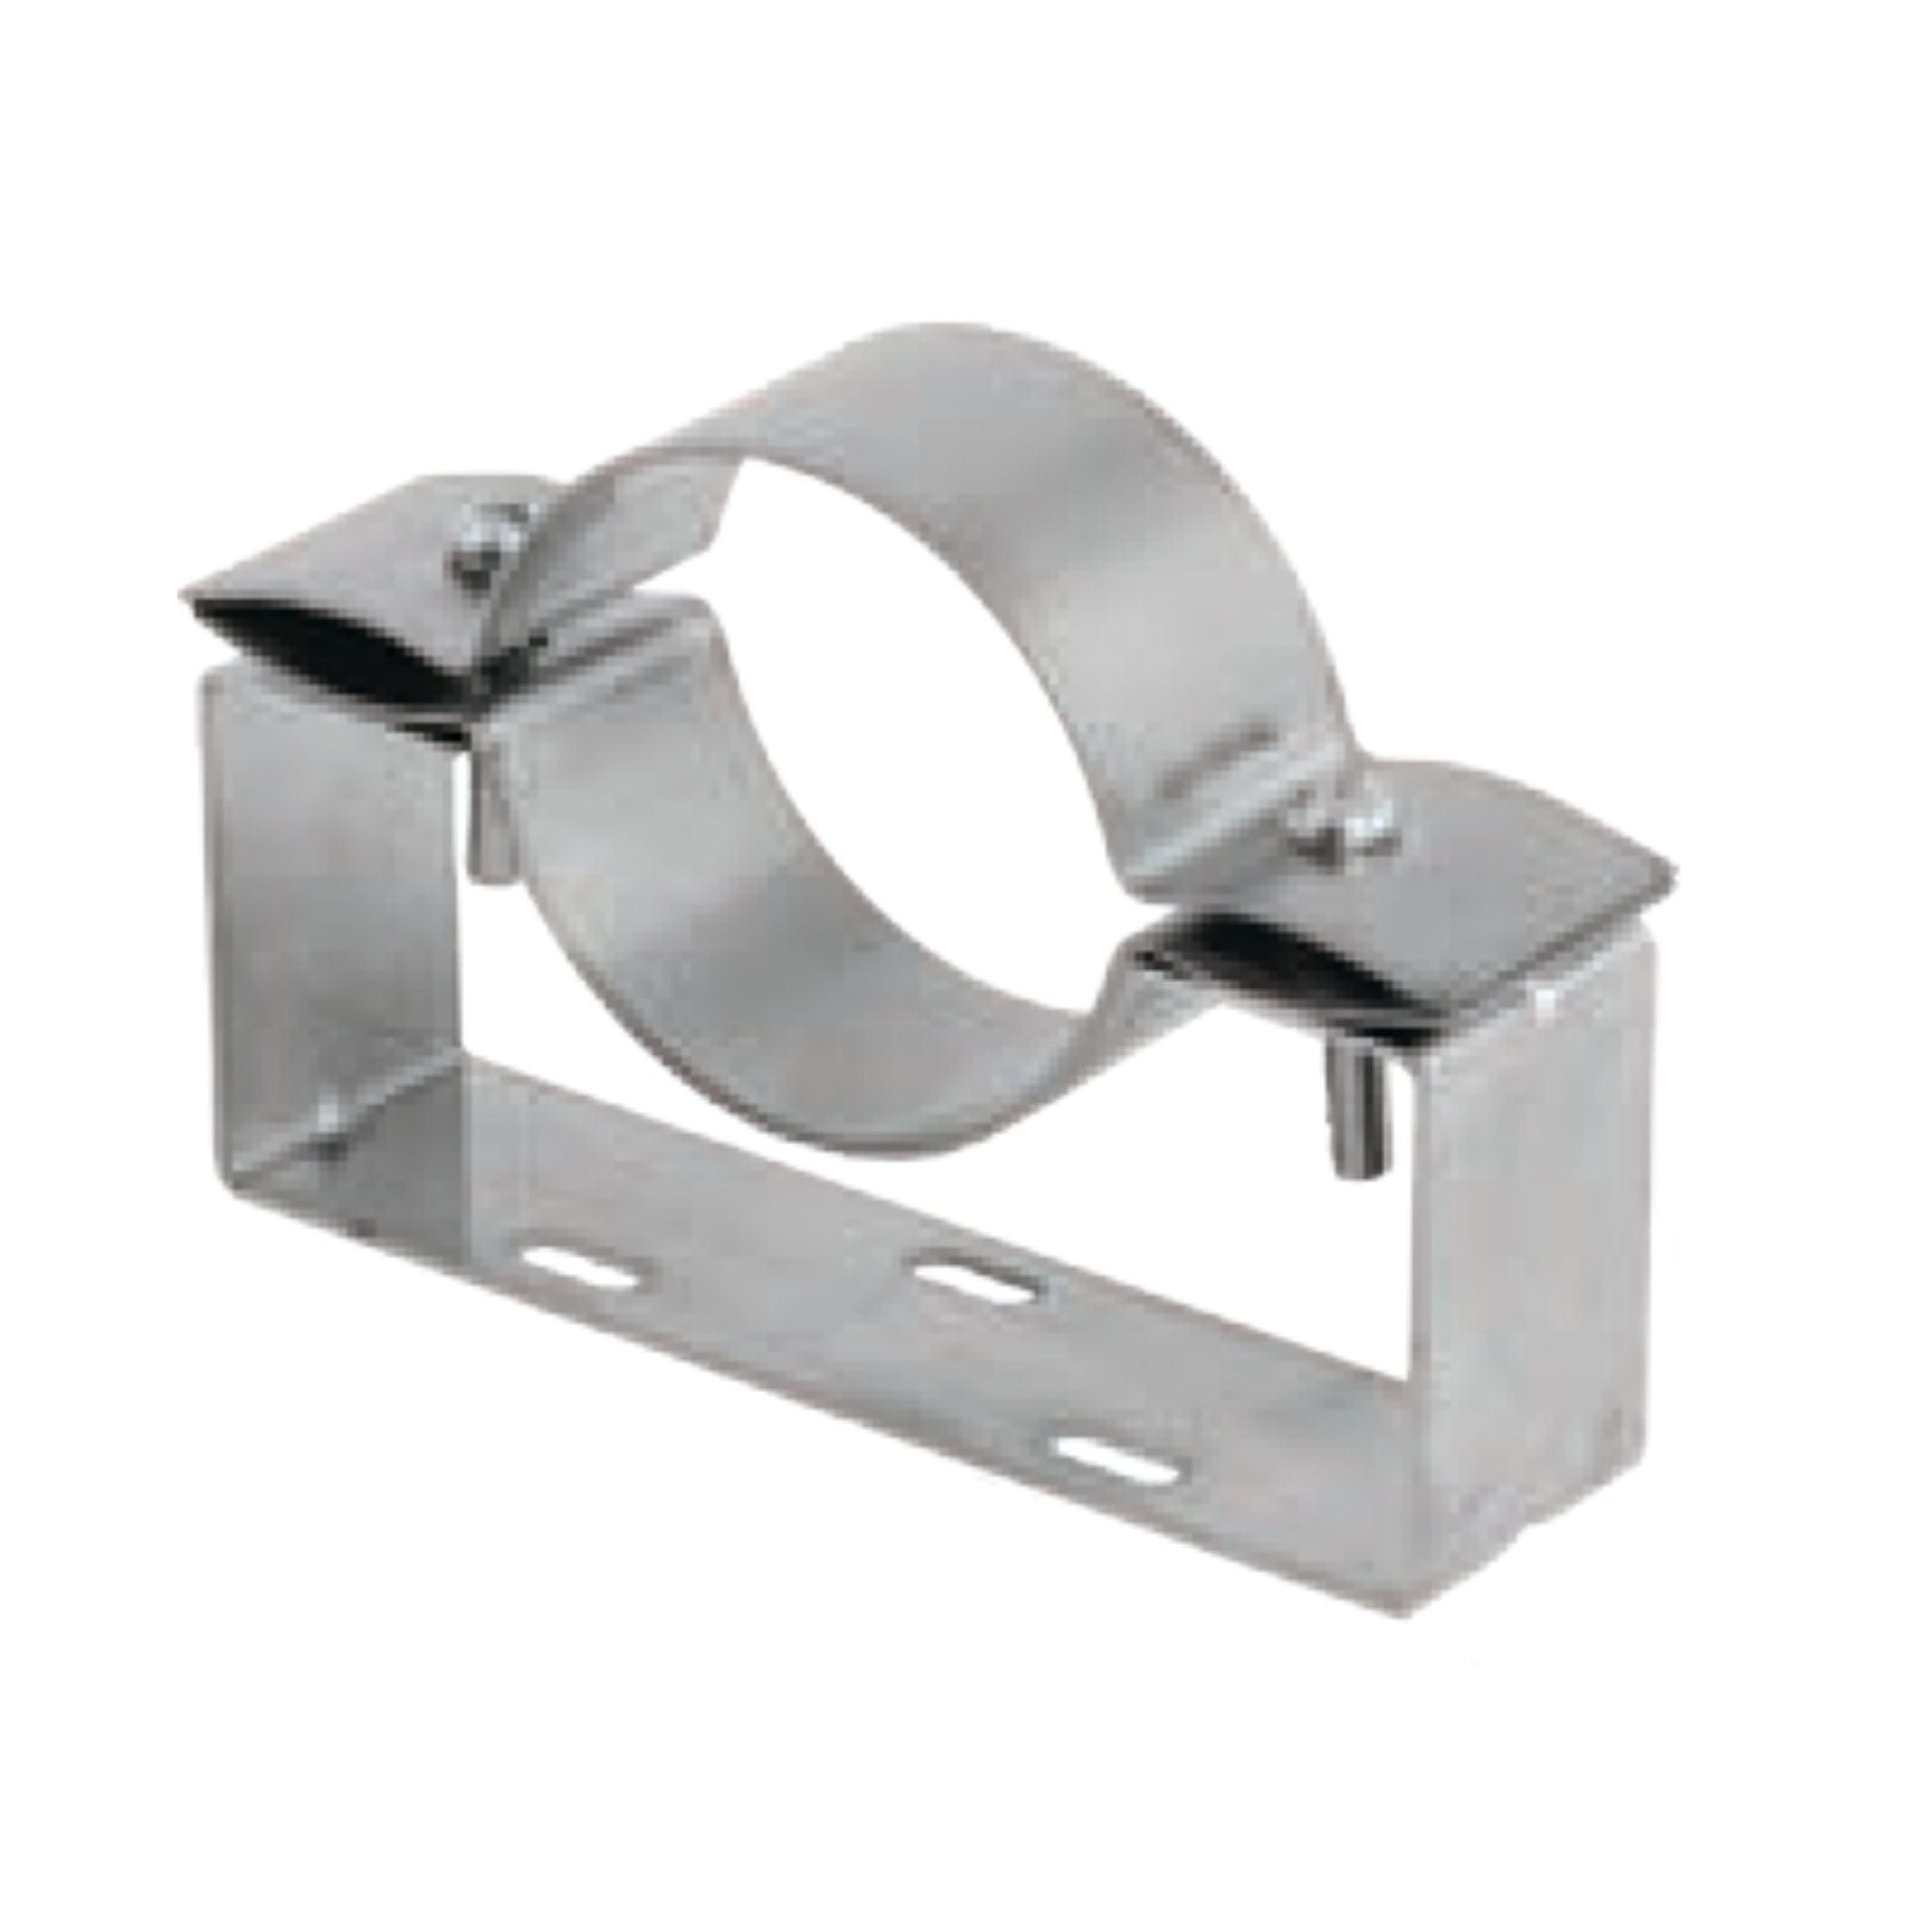 DuraVent FasNSeal 4" 29-4C Stainless Steel Adjustable Wall Bracket